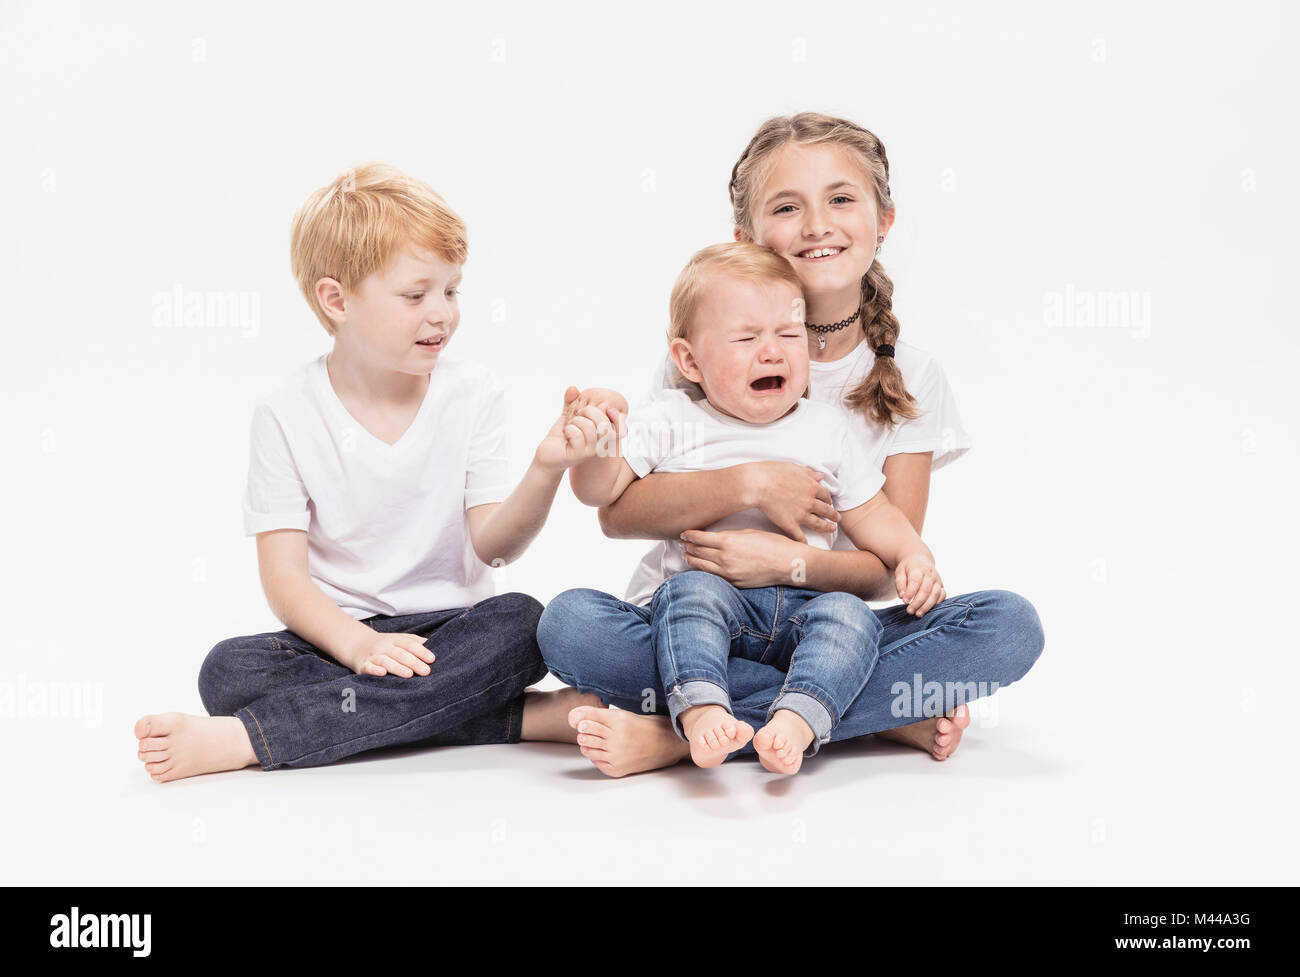 Portrait of brothers and sister Stock Photo